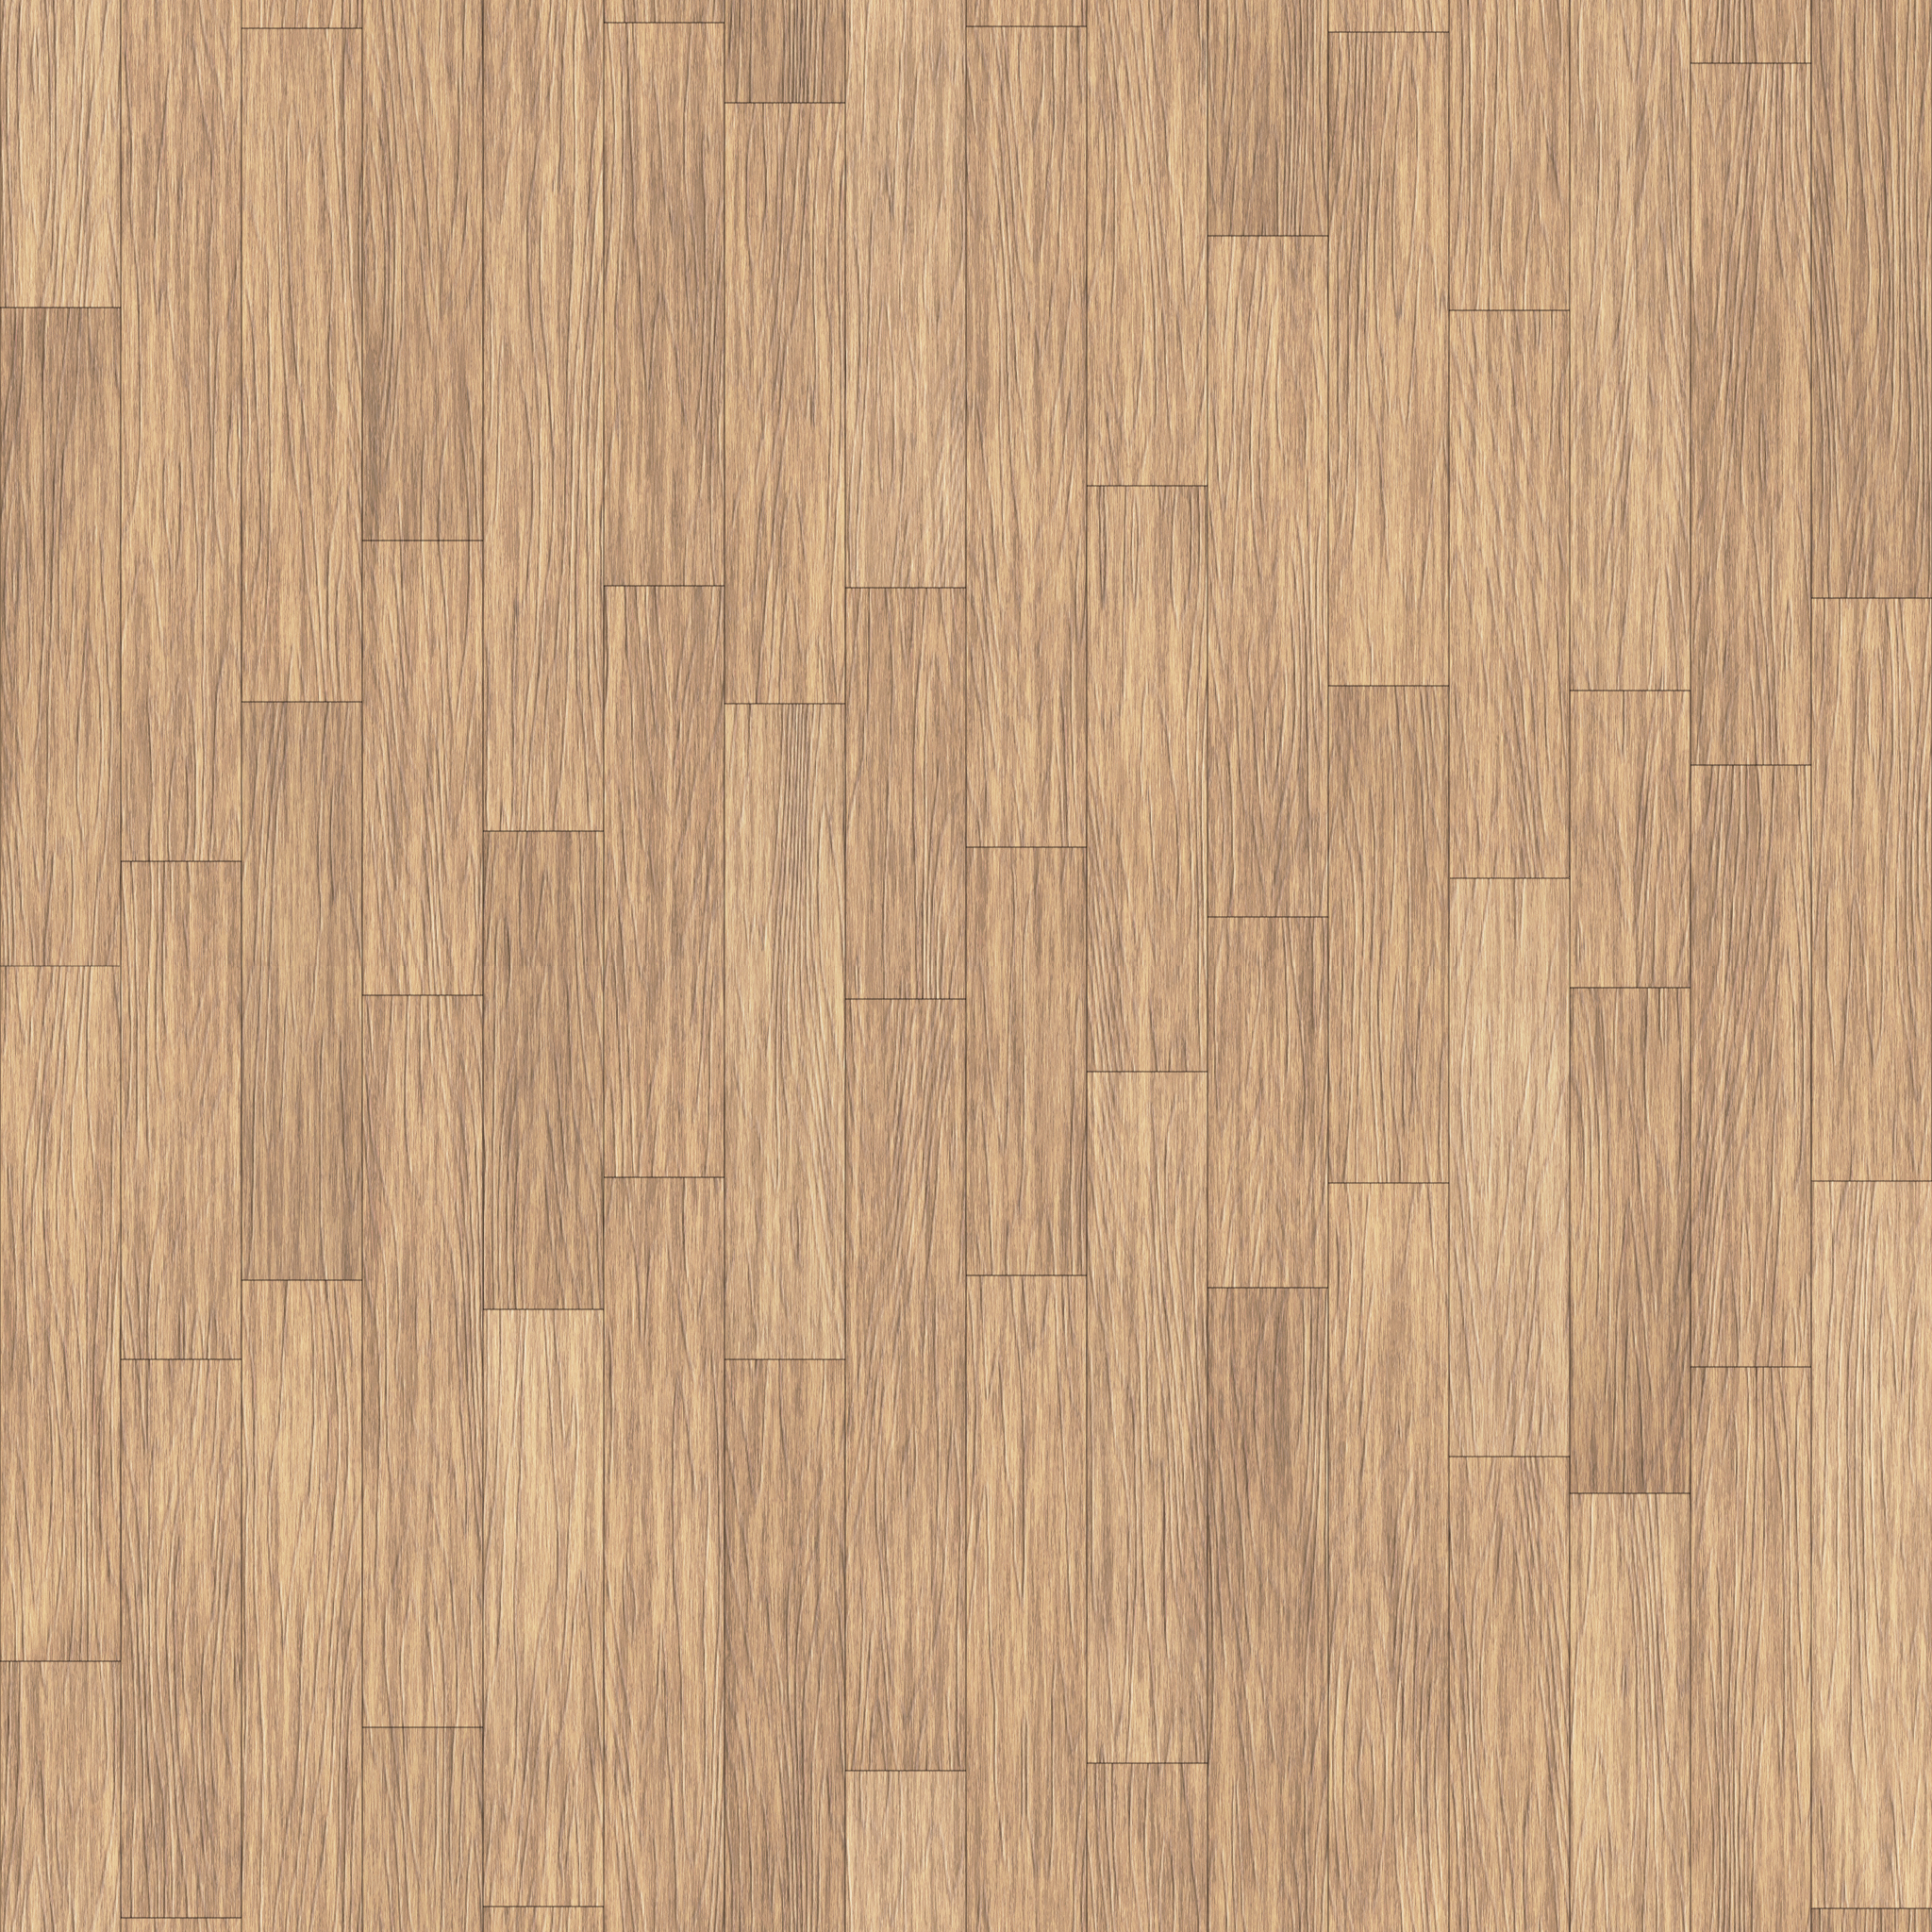 Bright Wooden Floor Texture [Tileable | 2048x2048] by FabooGuy on